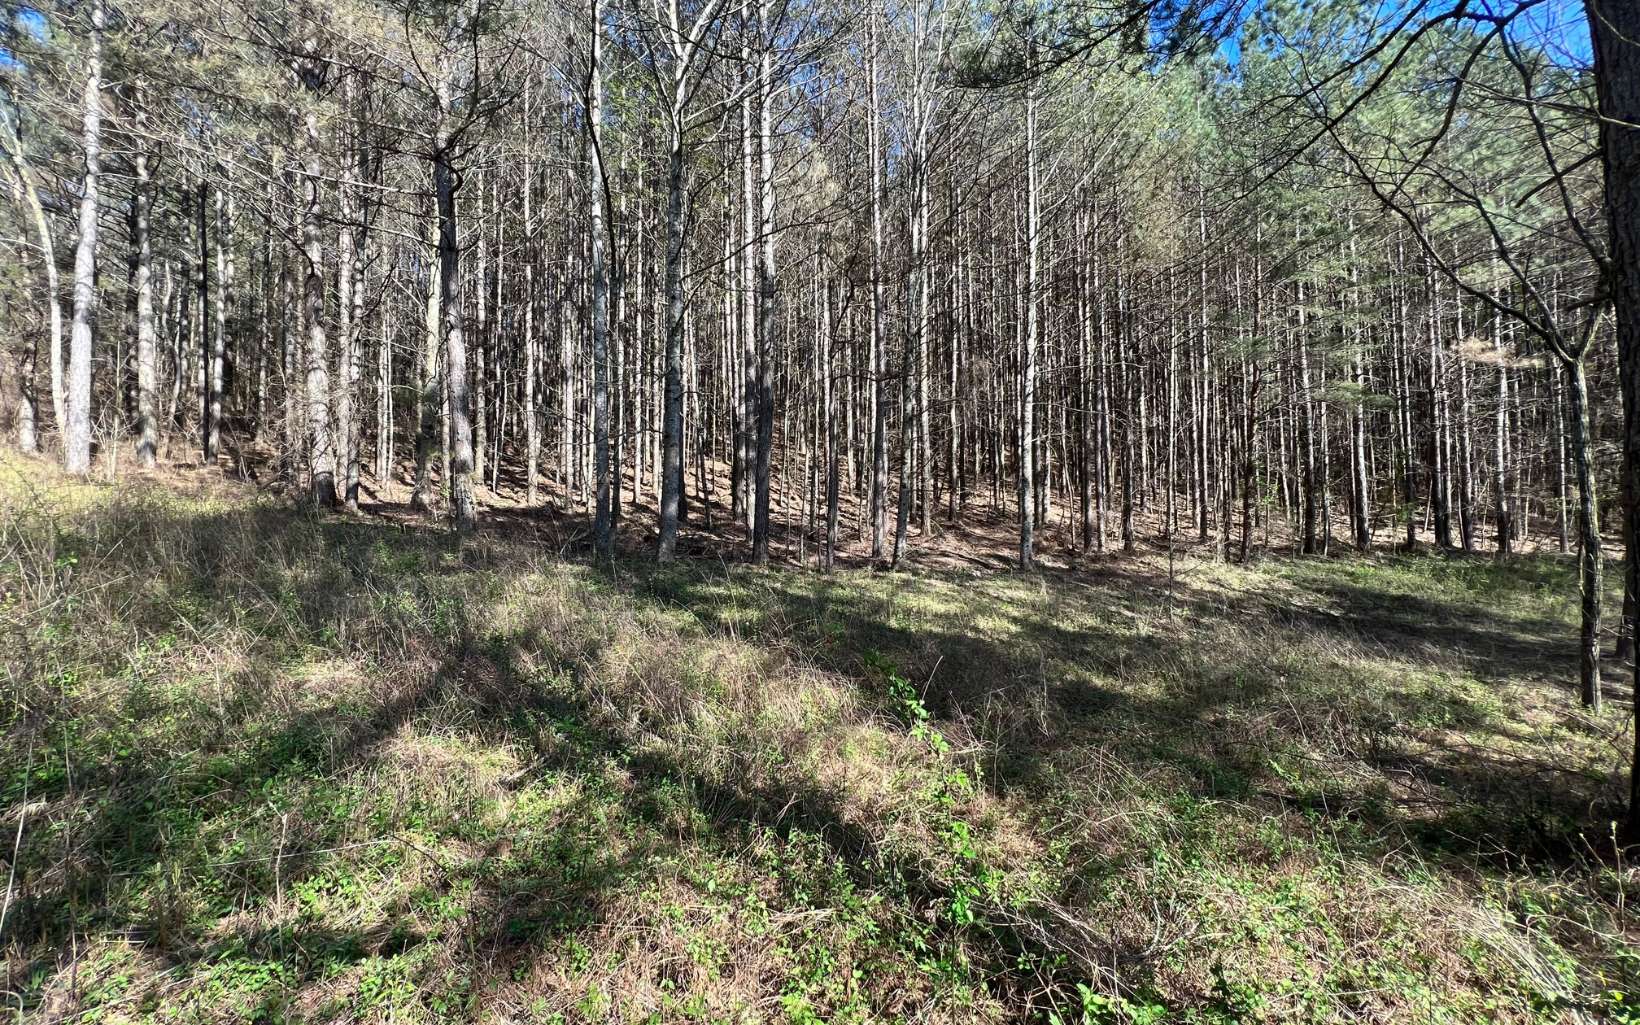 Been looking for that perfect building lot to build your long dreamed about home in the beautiful North GA Mountains? Come check this great level lot with all paved access in a gated community with new homes being built. Underground utilities, community water, timber framed community pavilion with picnic tables, swing for the children & another for adults, sink with running water, creek front hiking trails. Great place to entertain family and friends. Also located on a quite cul de sac for more privacy. Close to Ellijay and Dawsonville and the Cartecay River & Cartecay Vineyard. Bring your house plans and builder and finally make your dream home a reality.